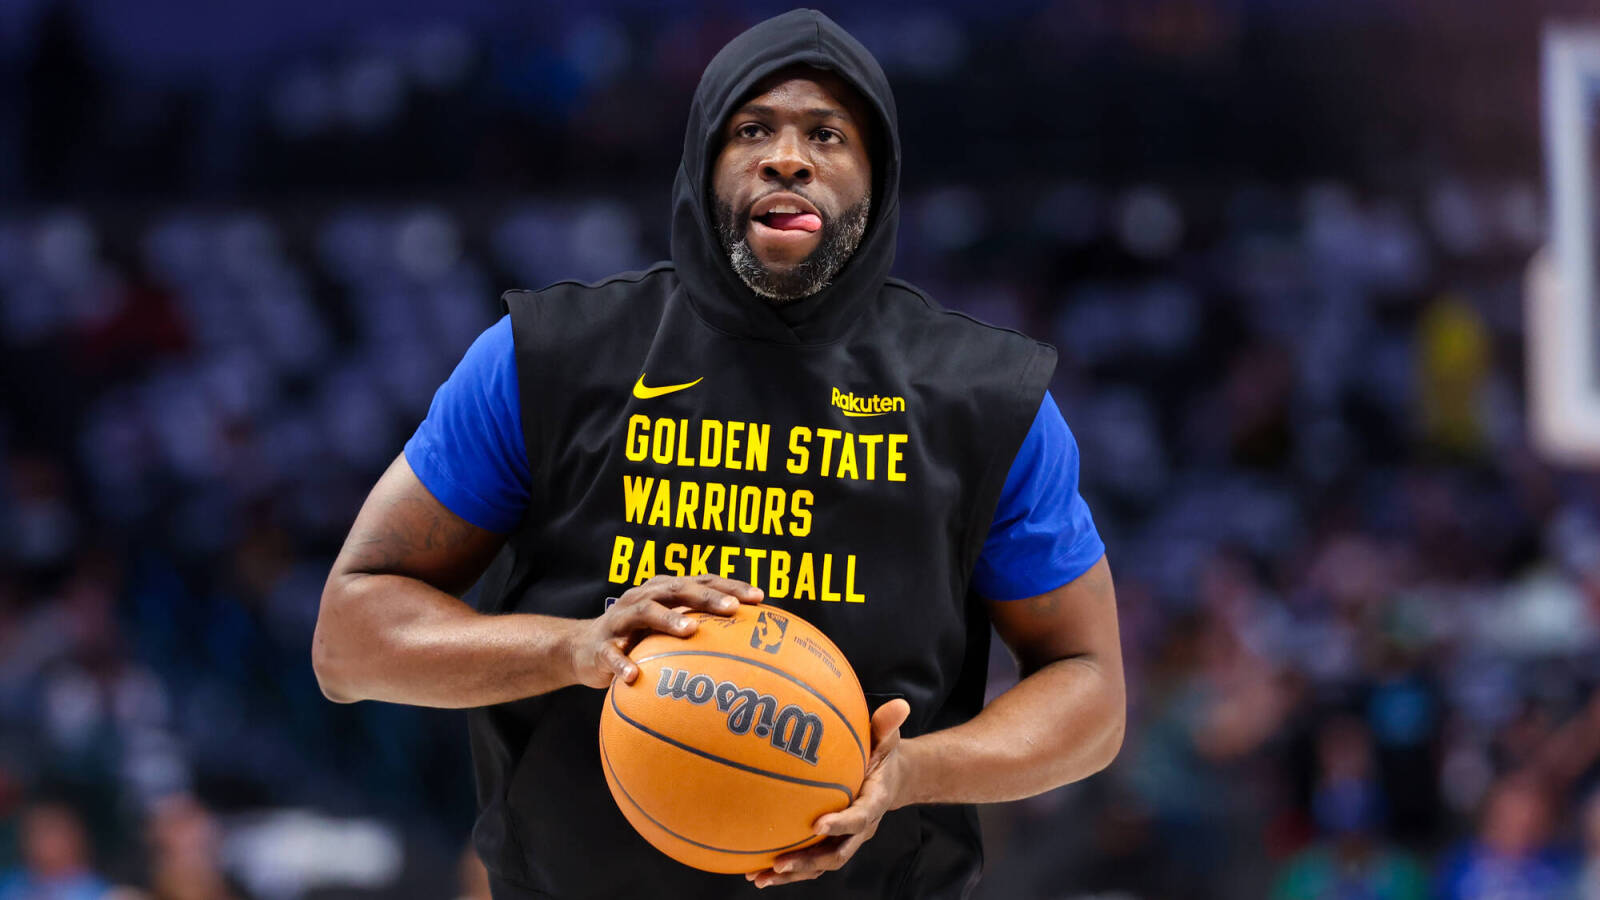 Draymond Green has strong response to point guard debate